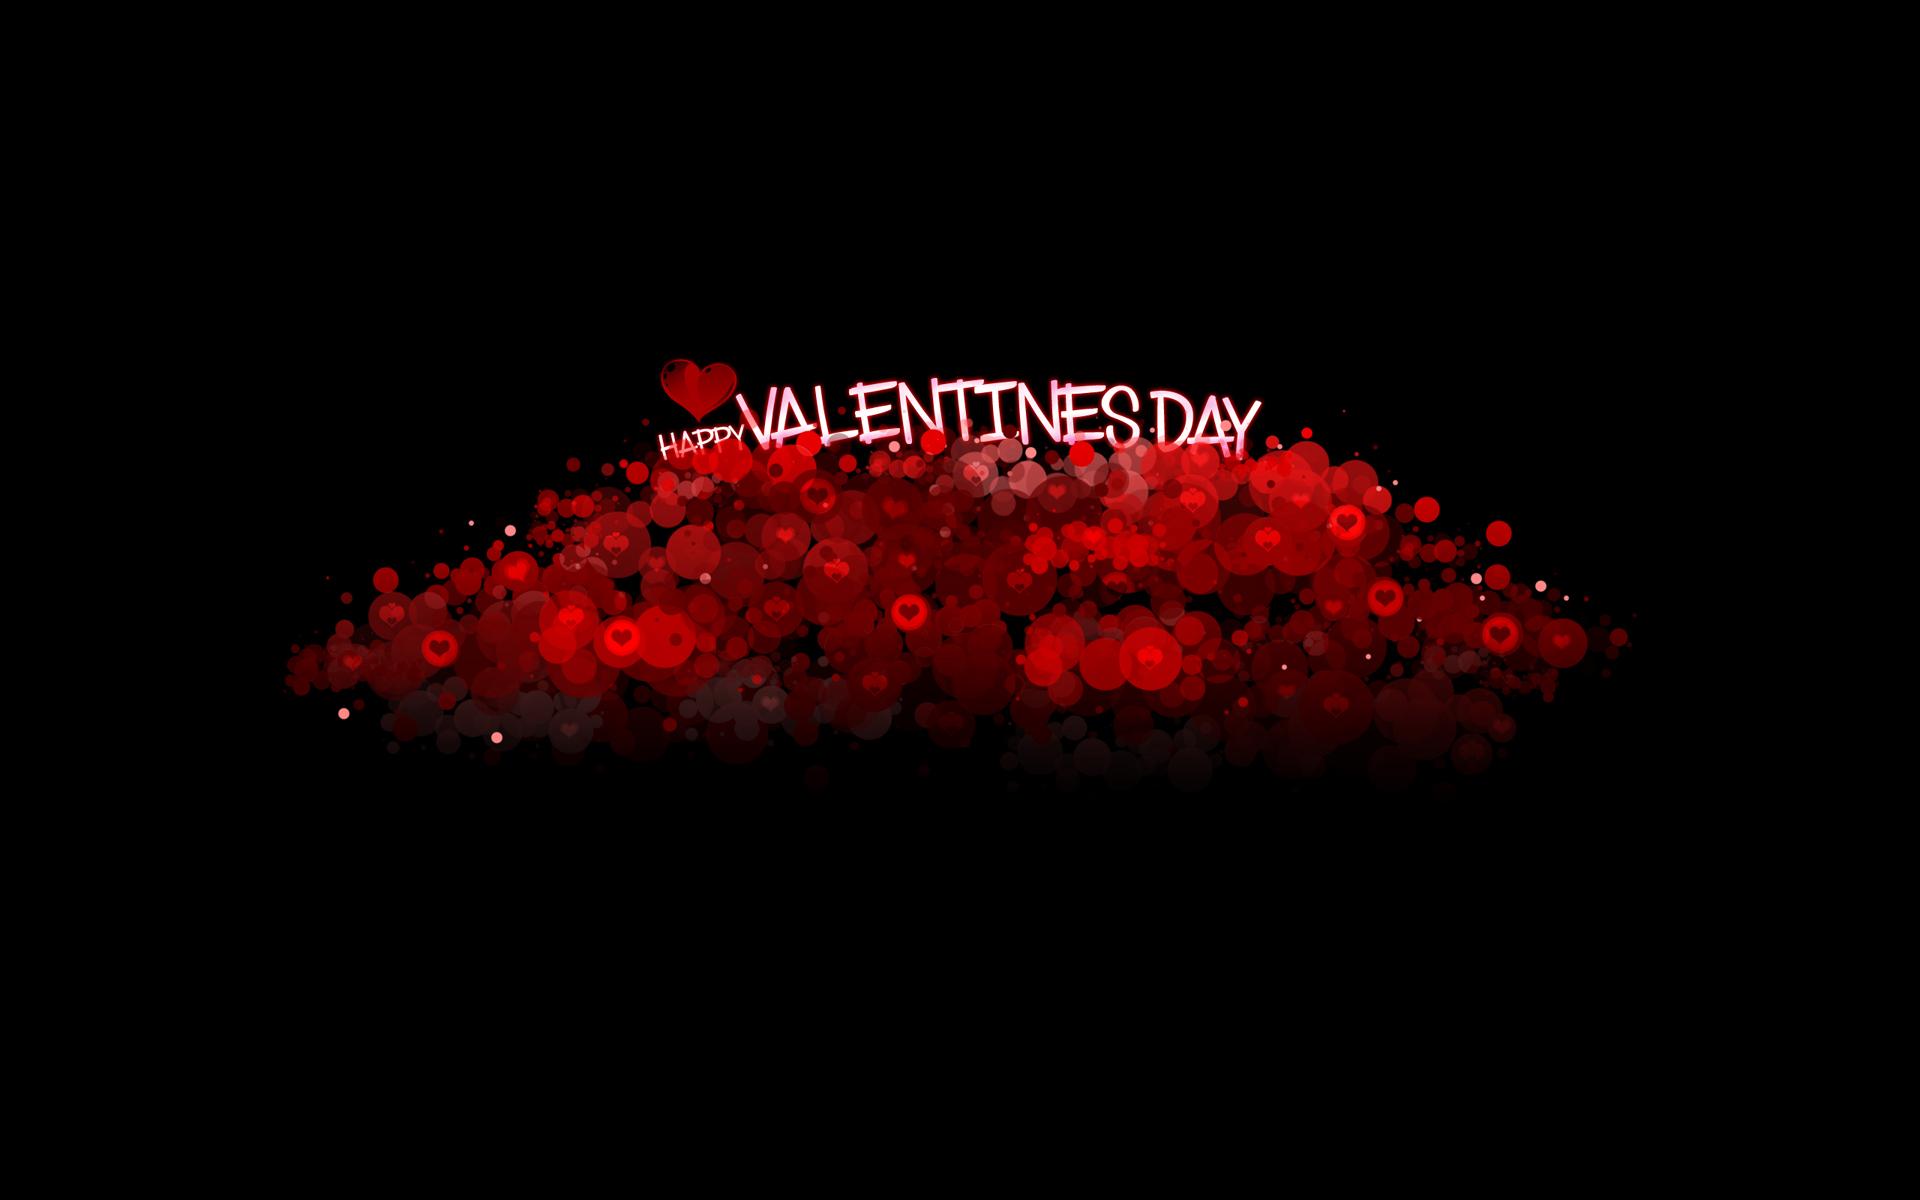 Scary valentines Stock Photos Royalty Free Scary valentines Images   Depositphotos